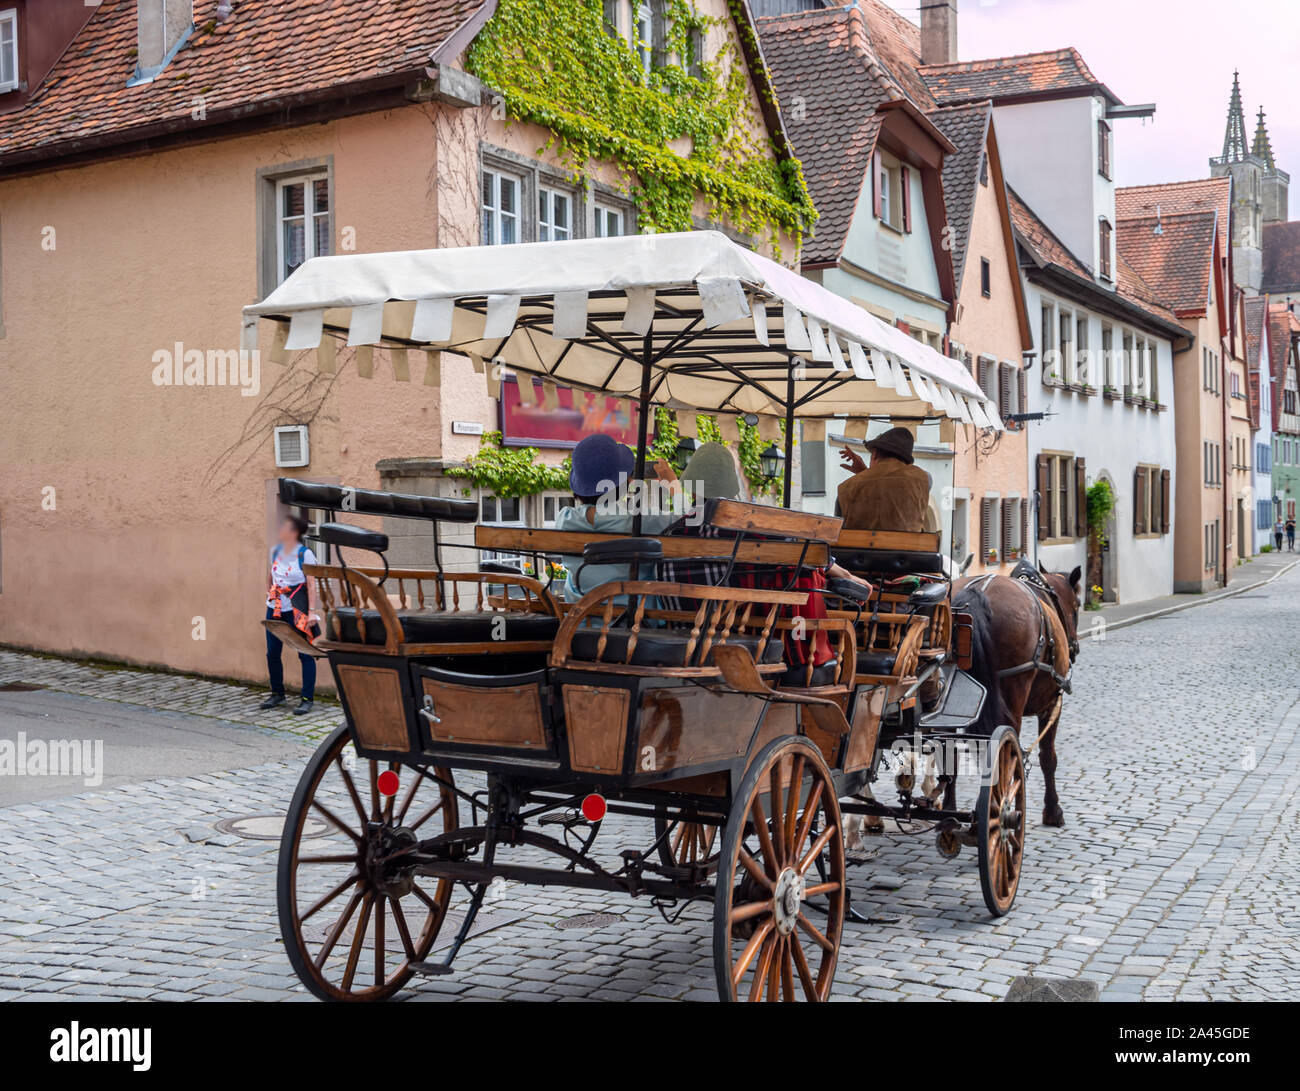 Horse-drawn carriage drives through the old town of Rothenburg ob der Tauber Stock Photo